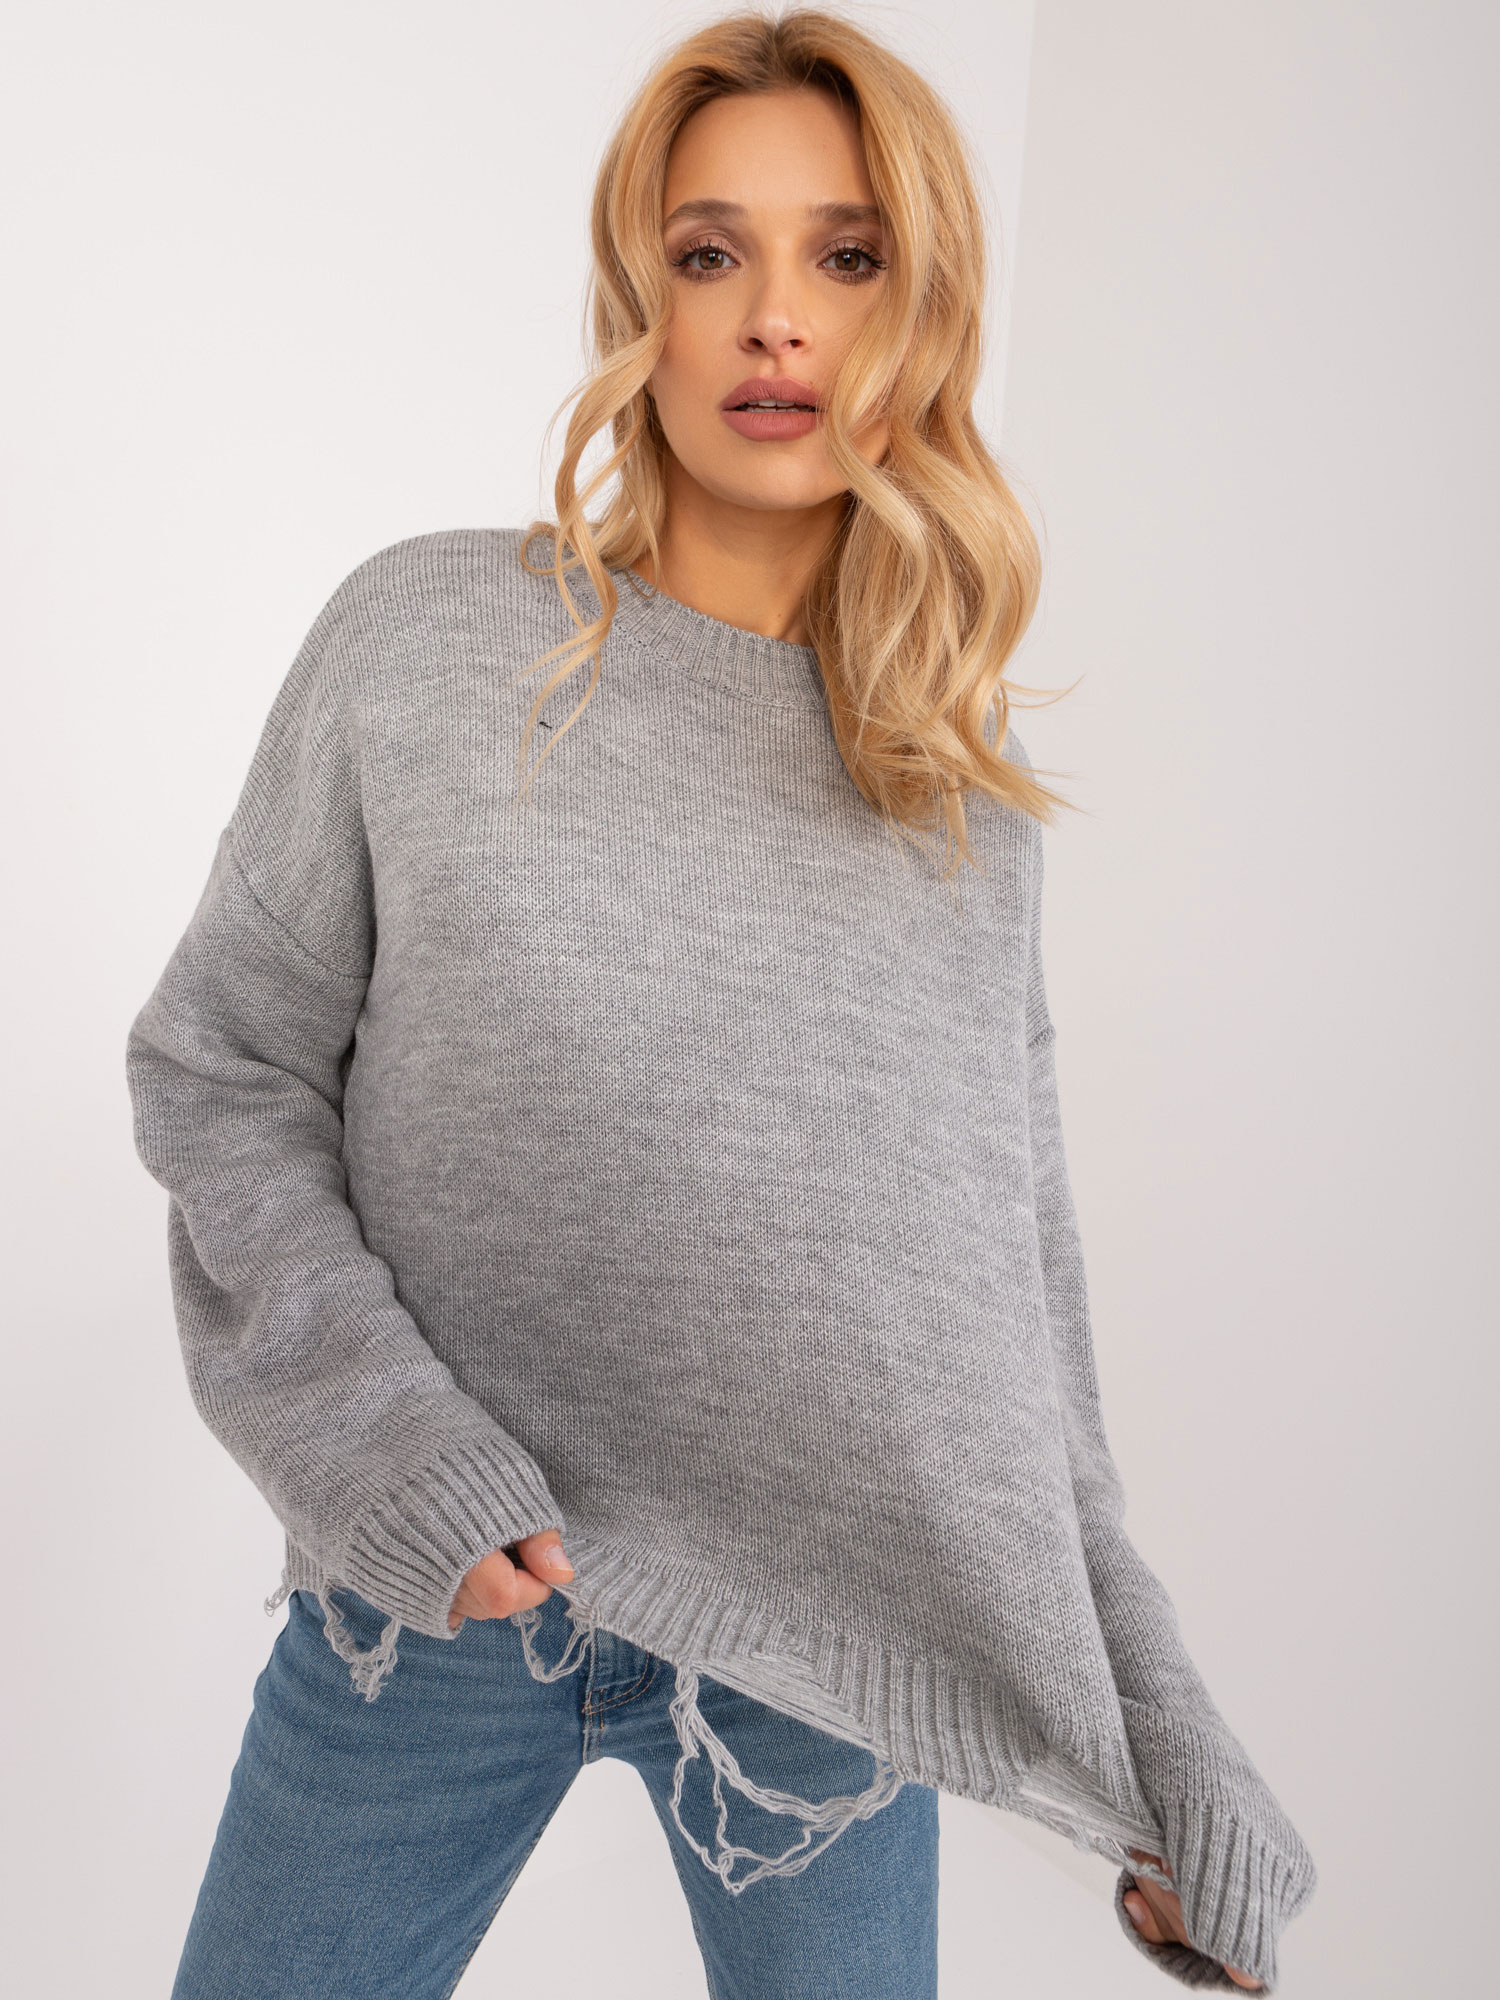 Gray oversize sweater with cuffs